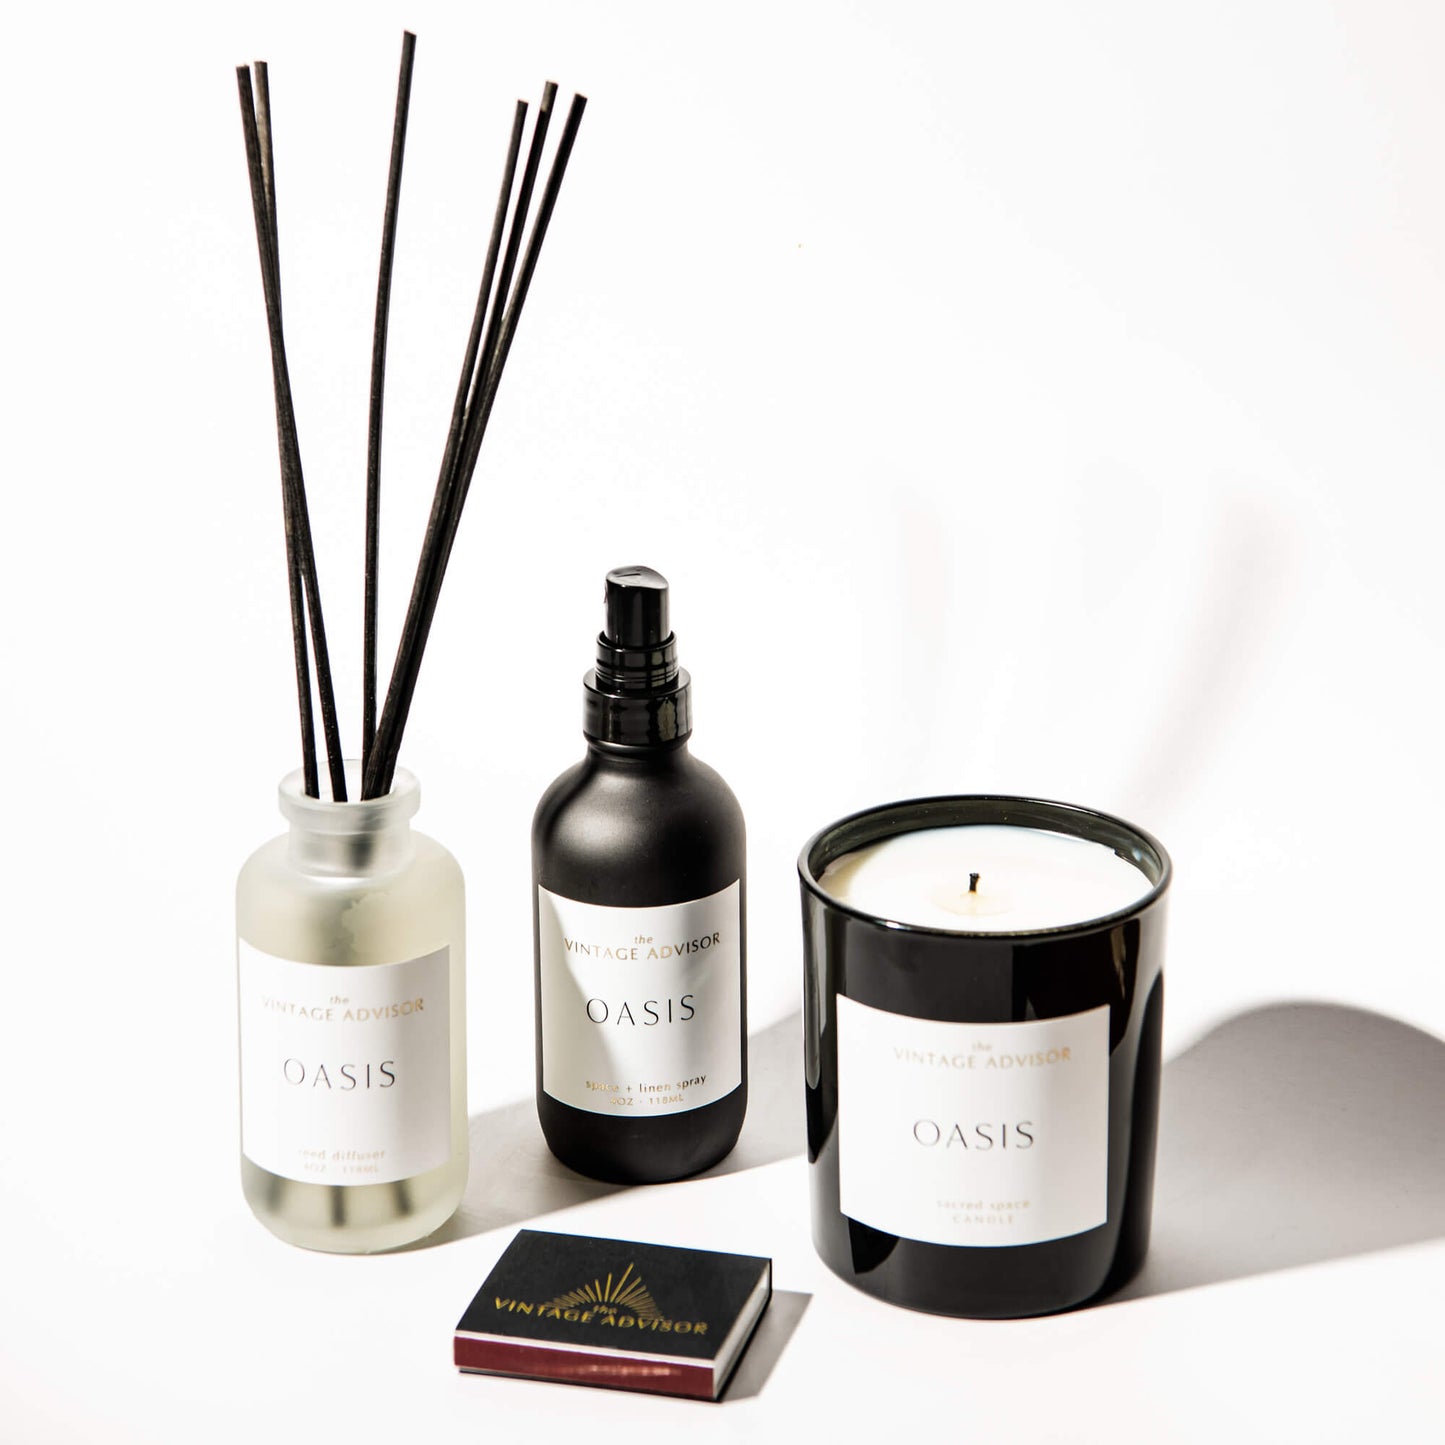 Oasis luxury home fragrance for your sacred space. Notes: fig, green leaf, jasmine, moss